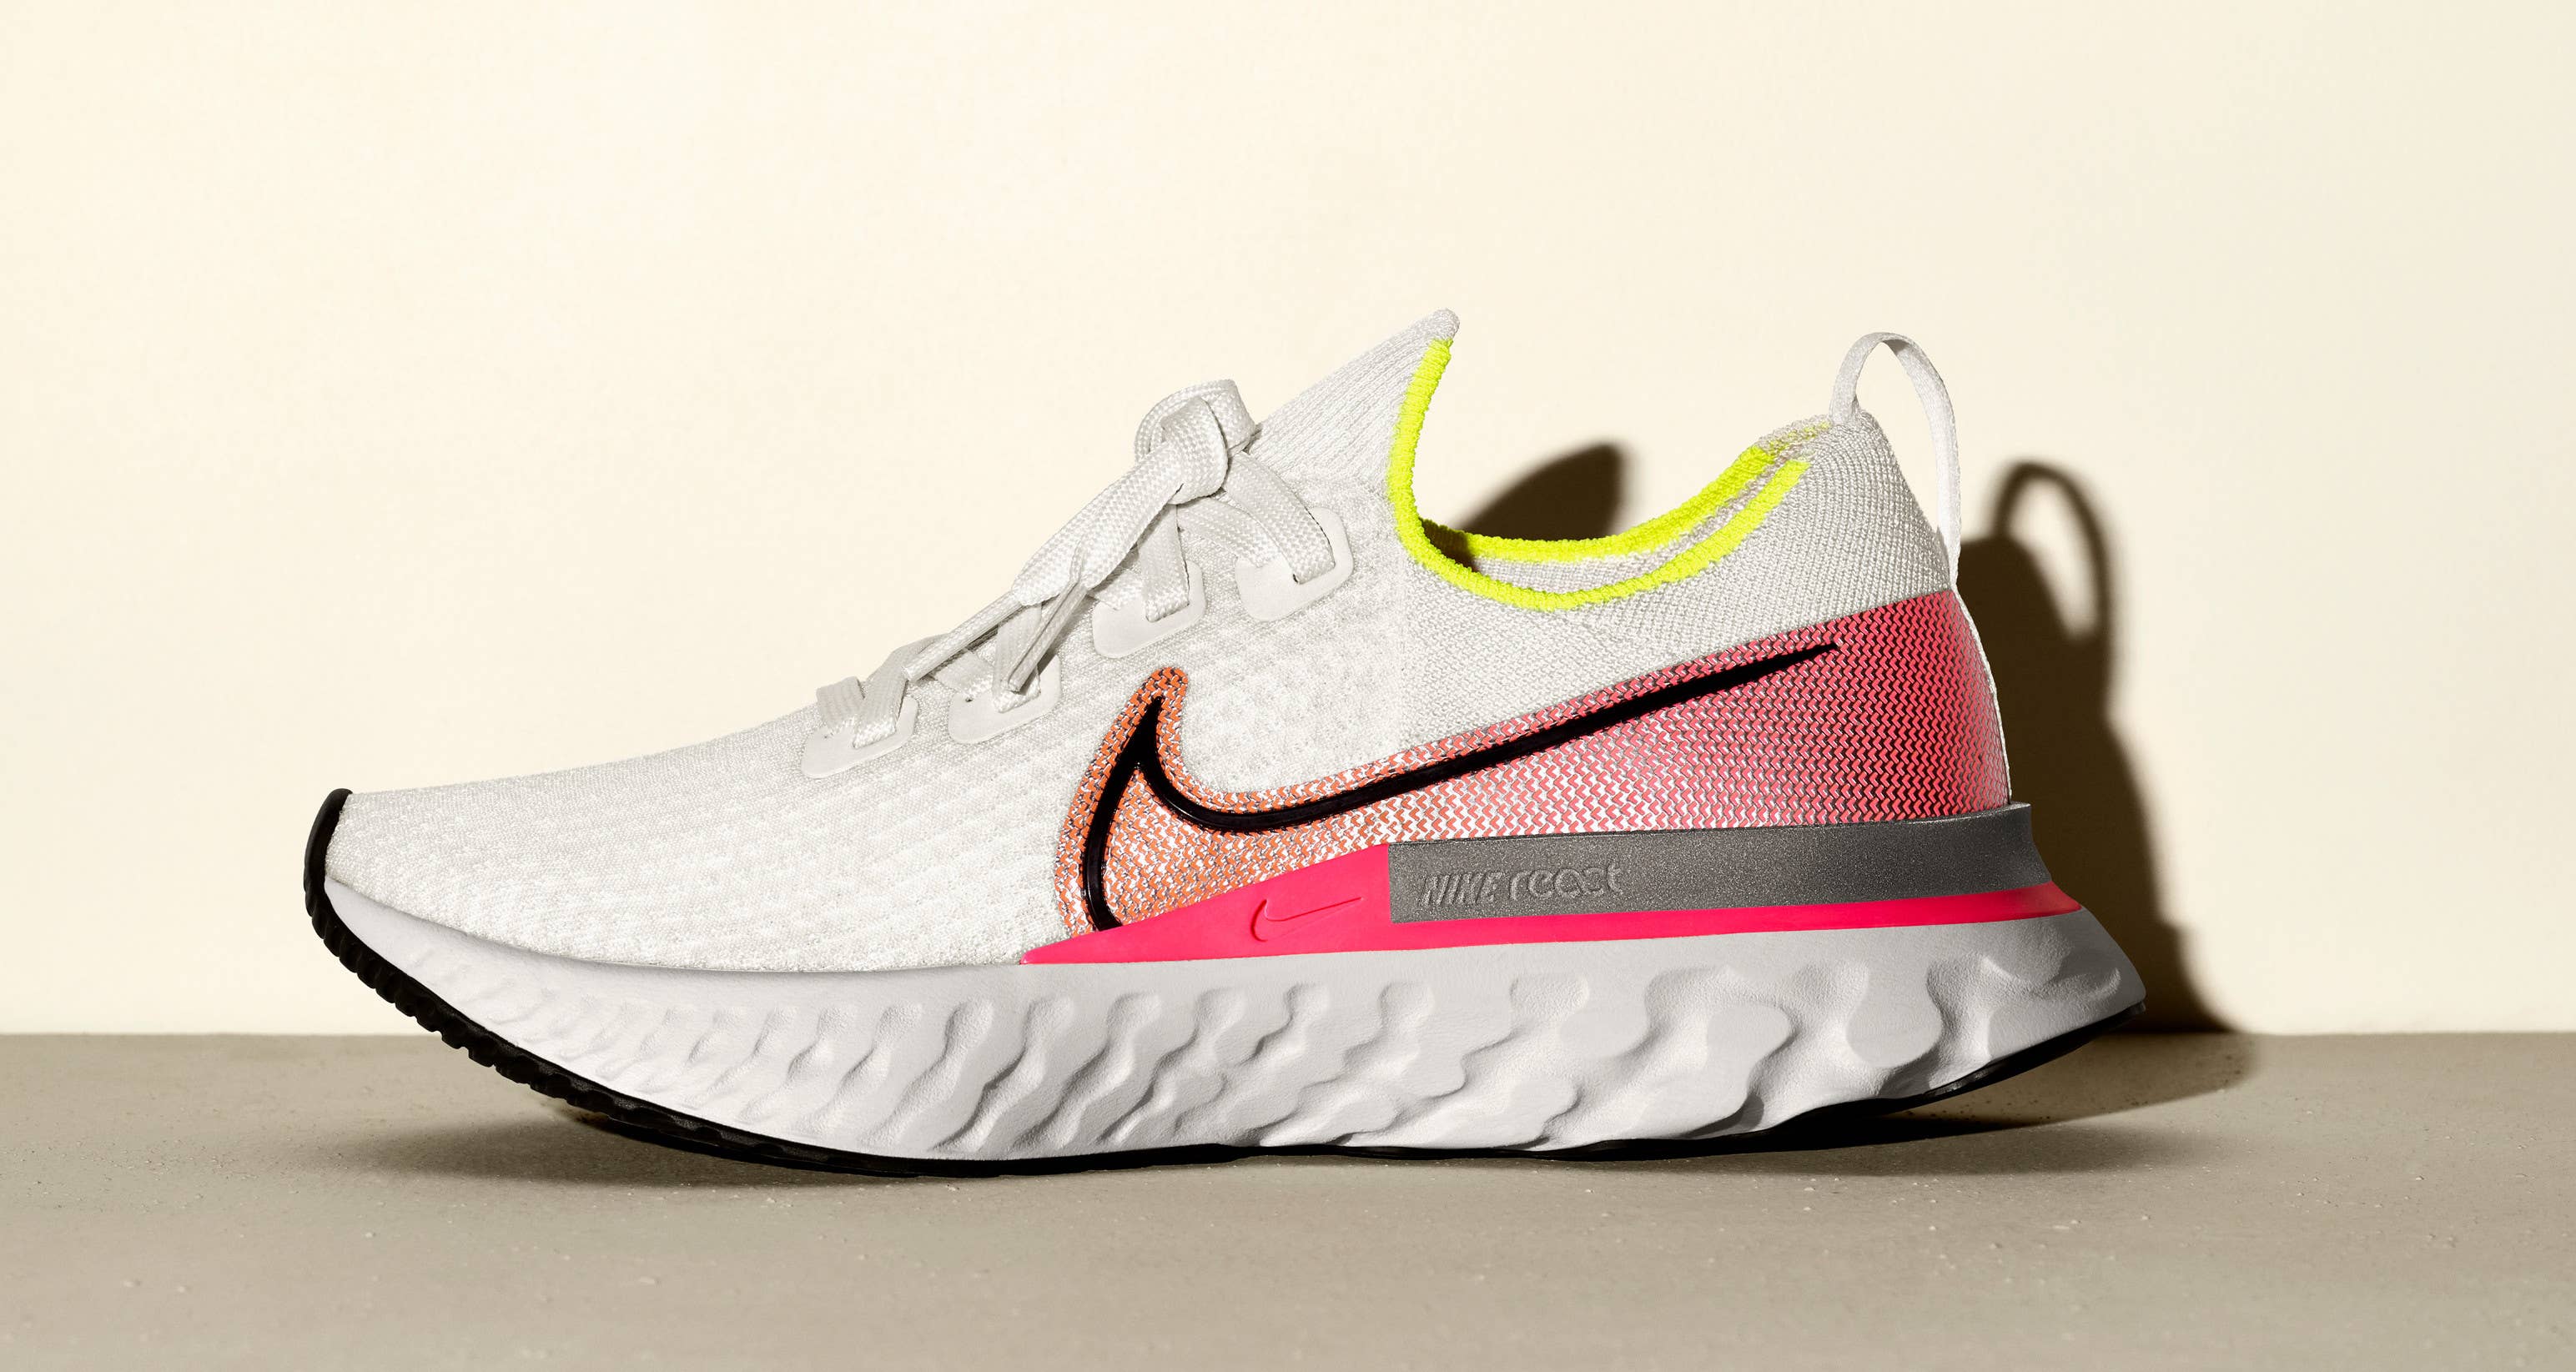 Nike's New React Running Shoe Helps Fight Injuries |